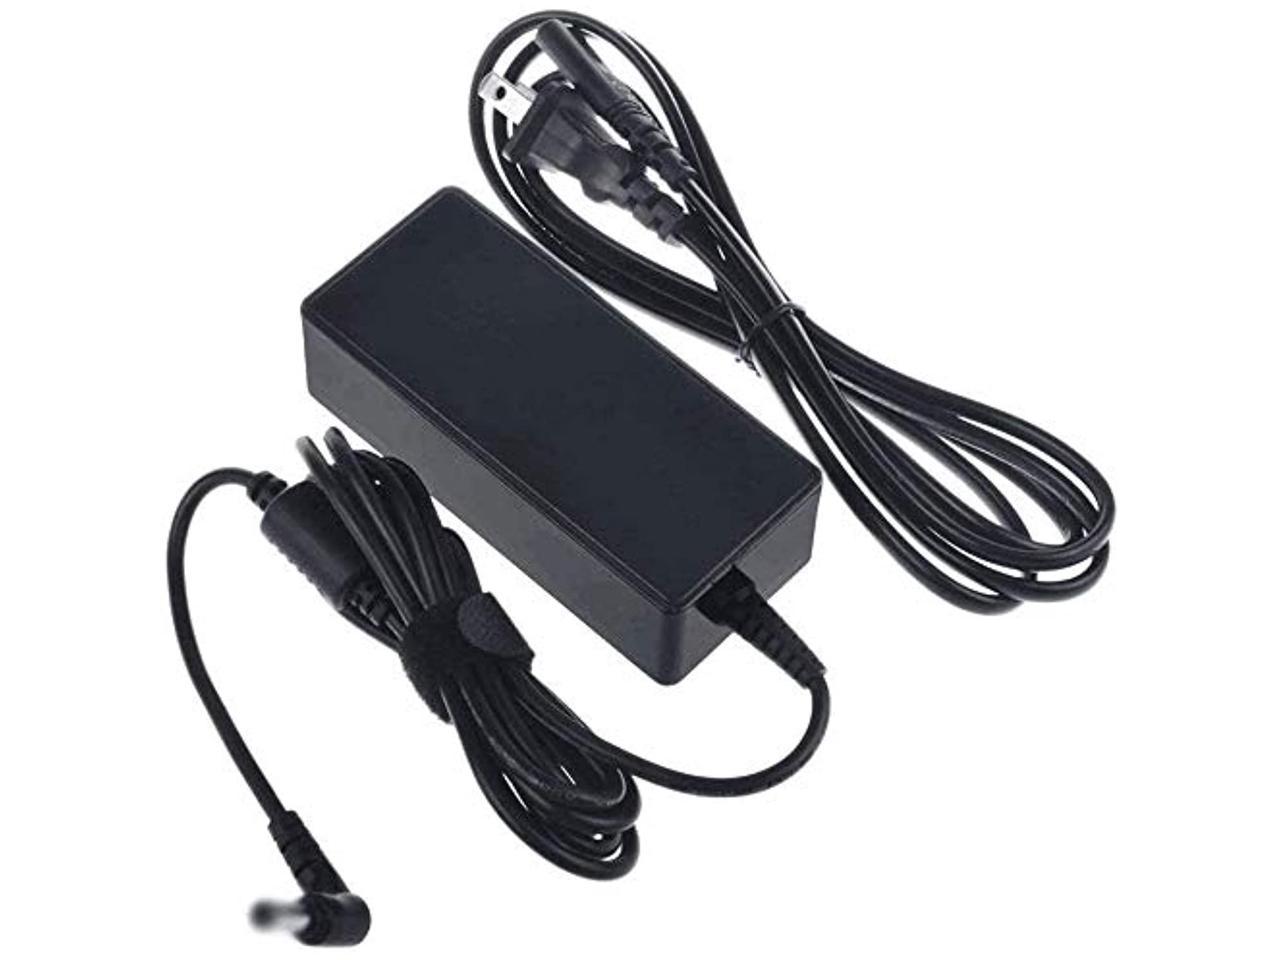 Ac Adapter For Bsy Bsyf120250u W Switching Power Supply Dc Charger ...